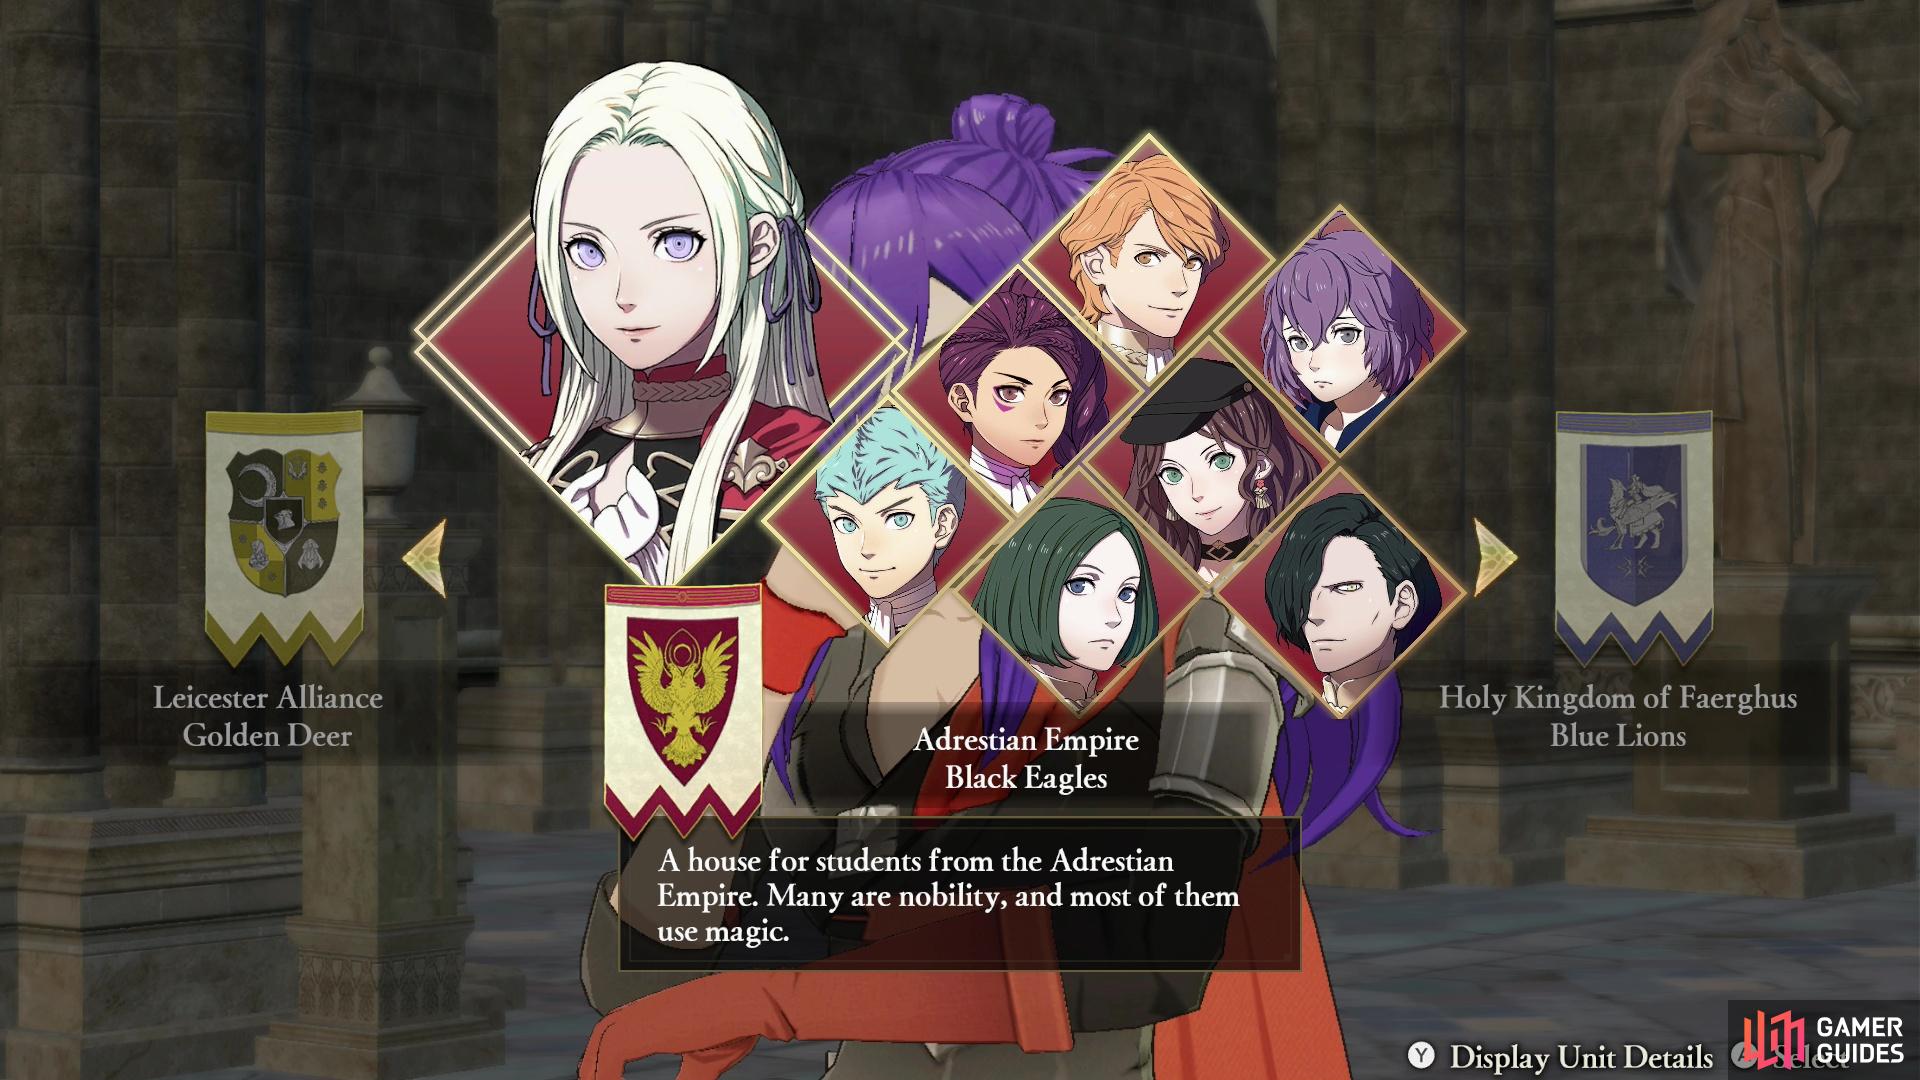 If you pick the Black Eagles, Dorothea will be one of your starting characters.